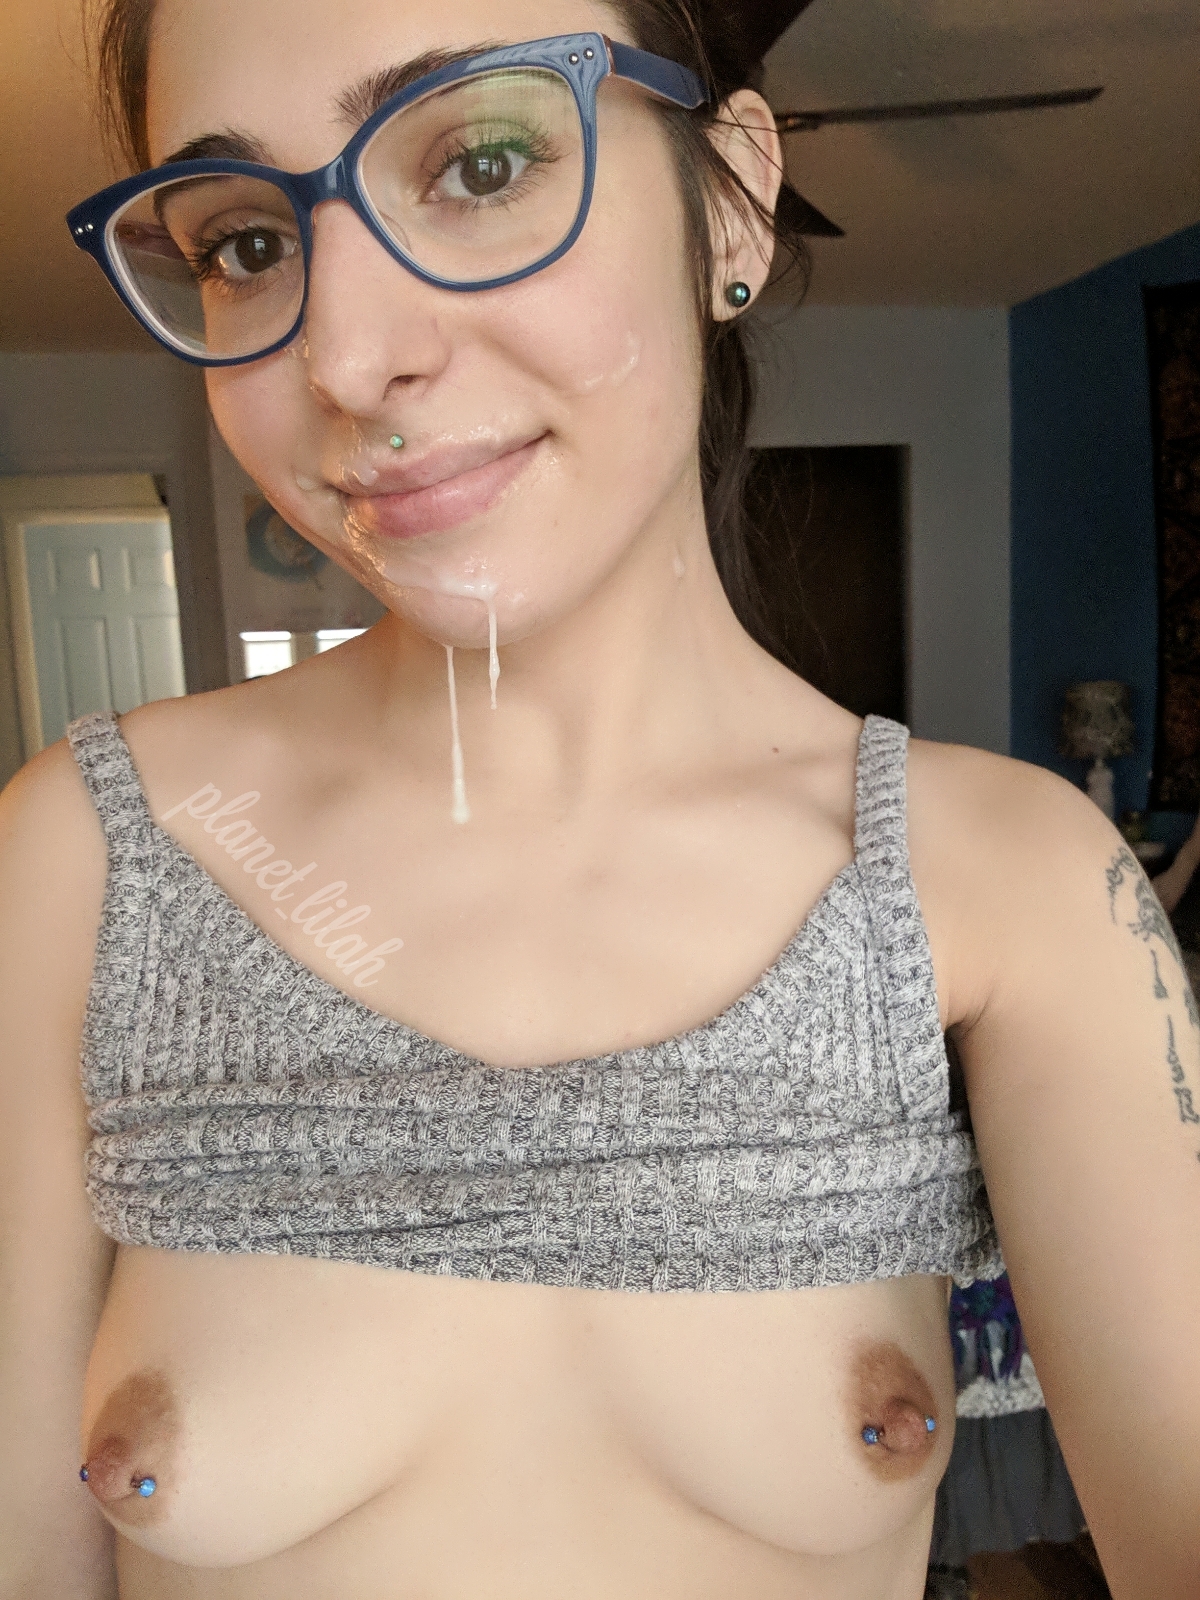 adult cam without credit card yahoo Busty, Glasses, Nerd, Nerdyglasses, Piercednipples, Smiling, Tattoo